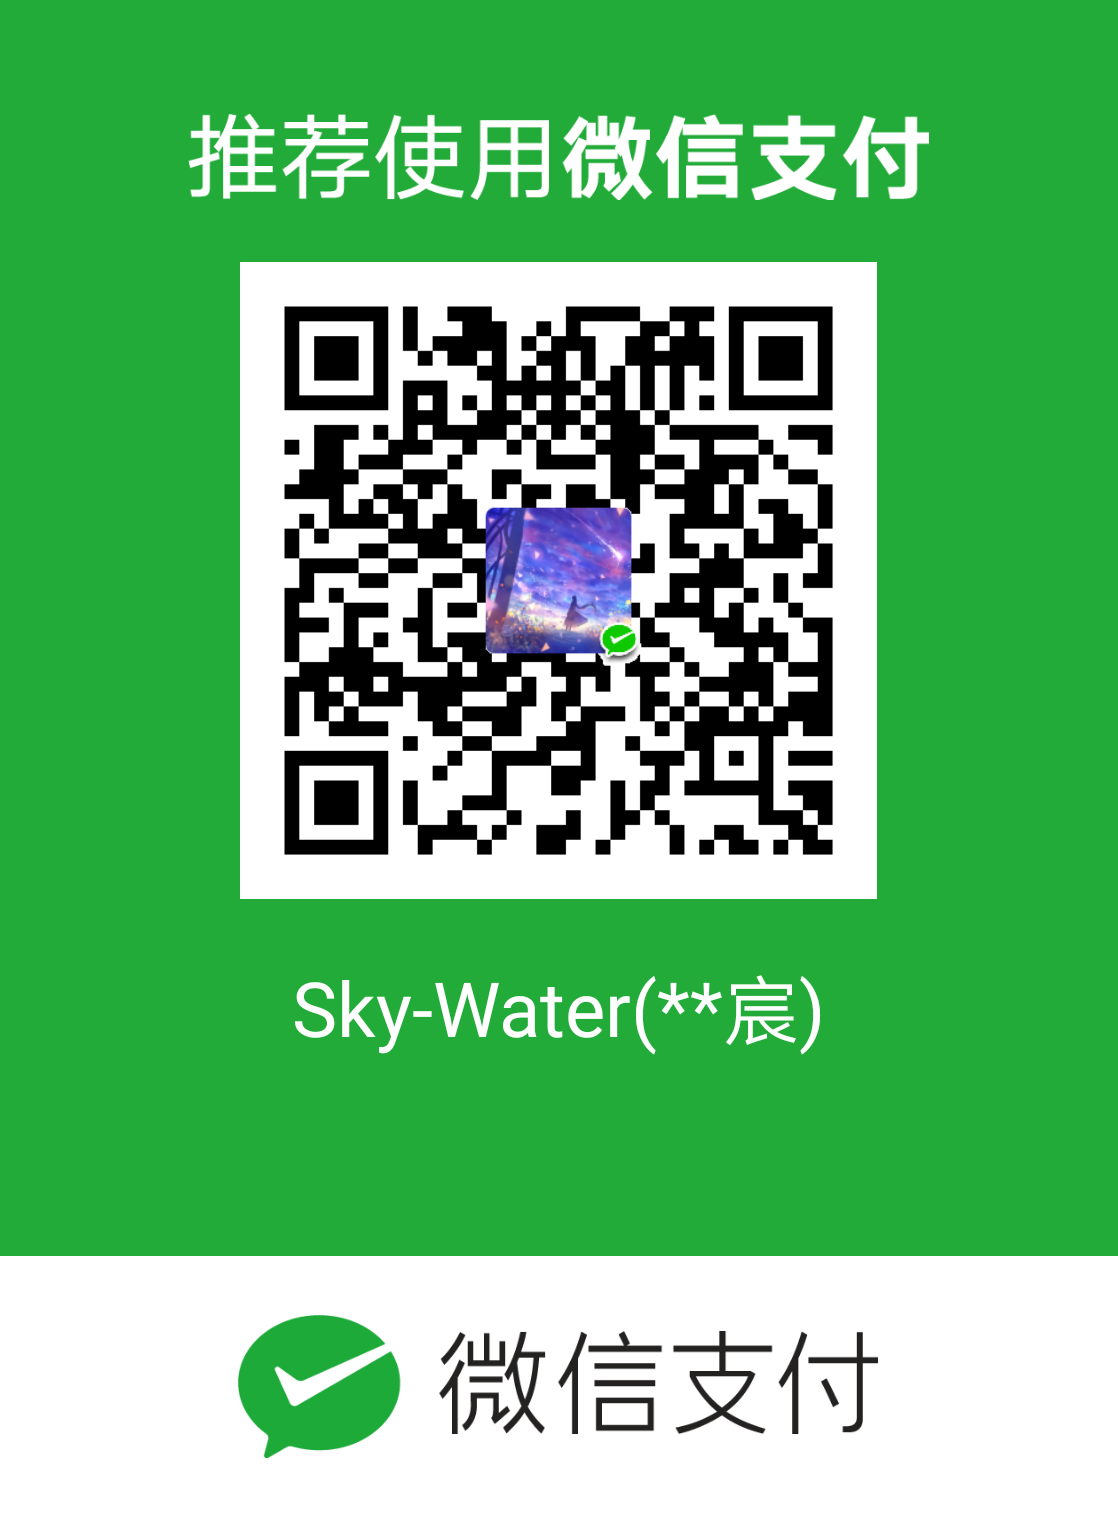 Donate by Wechat-Pay